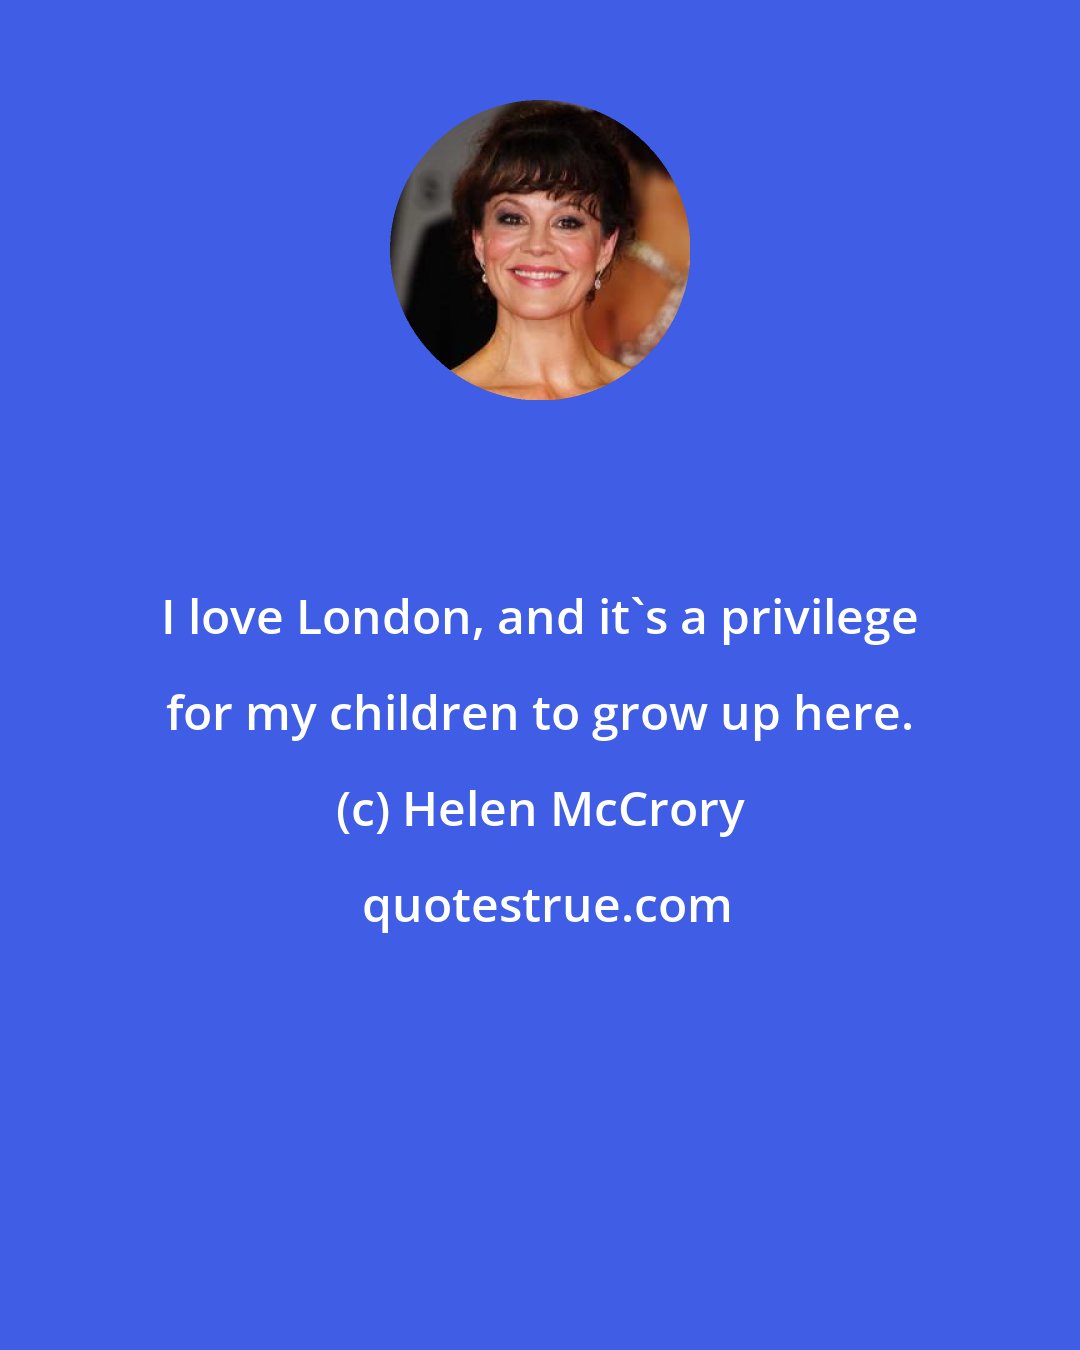 Helen McCrory: I love London, and it's a privilege for my children to grow up here.